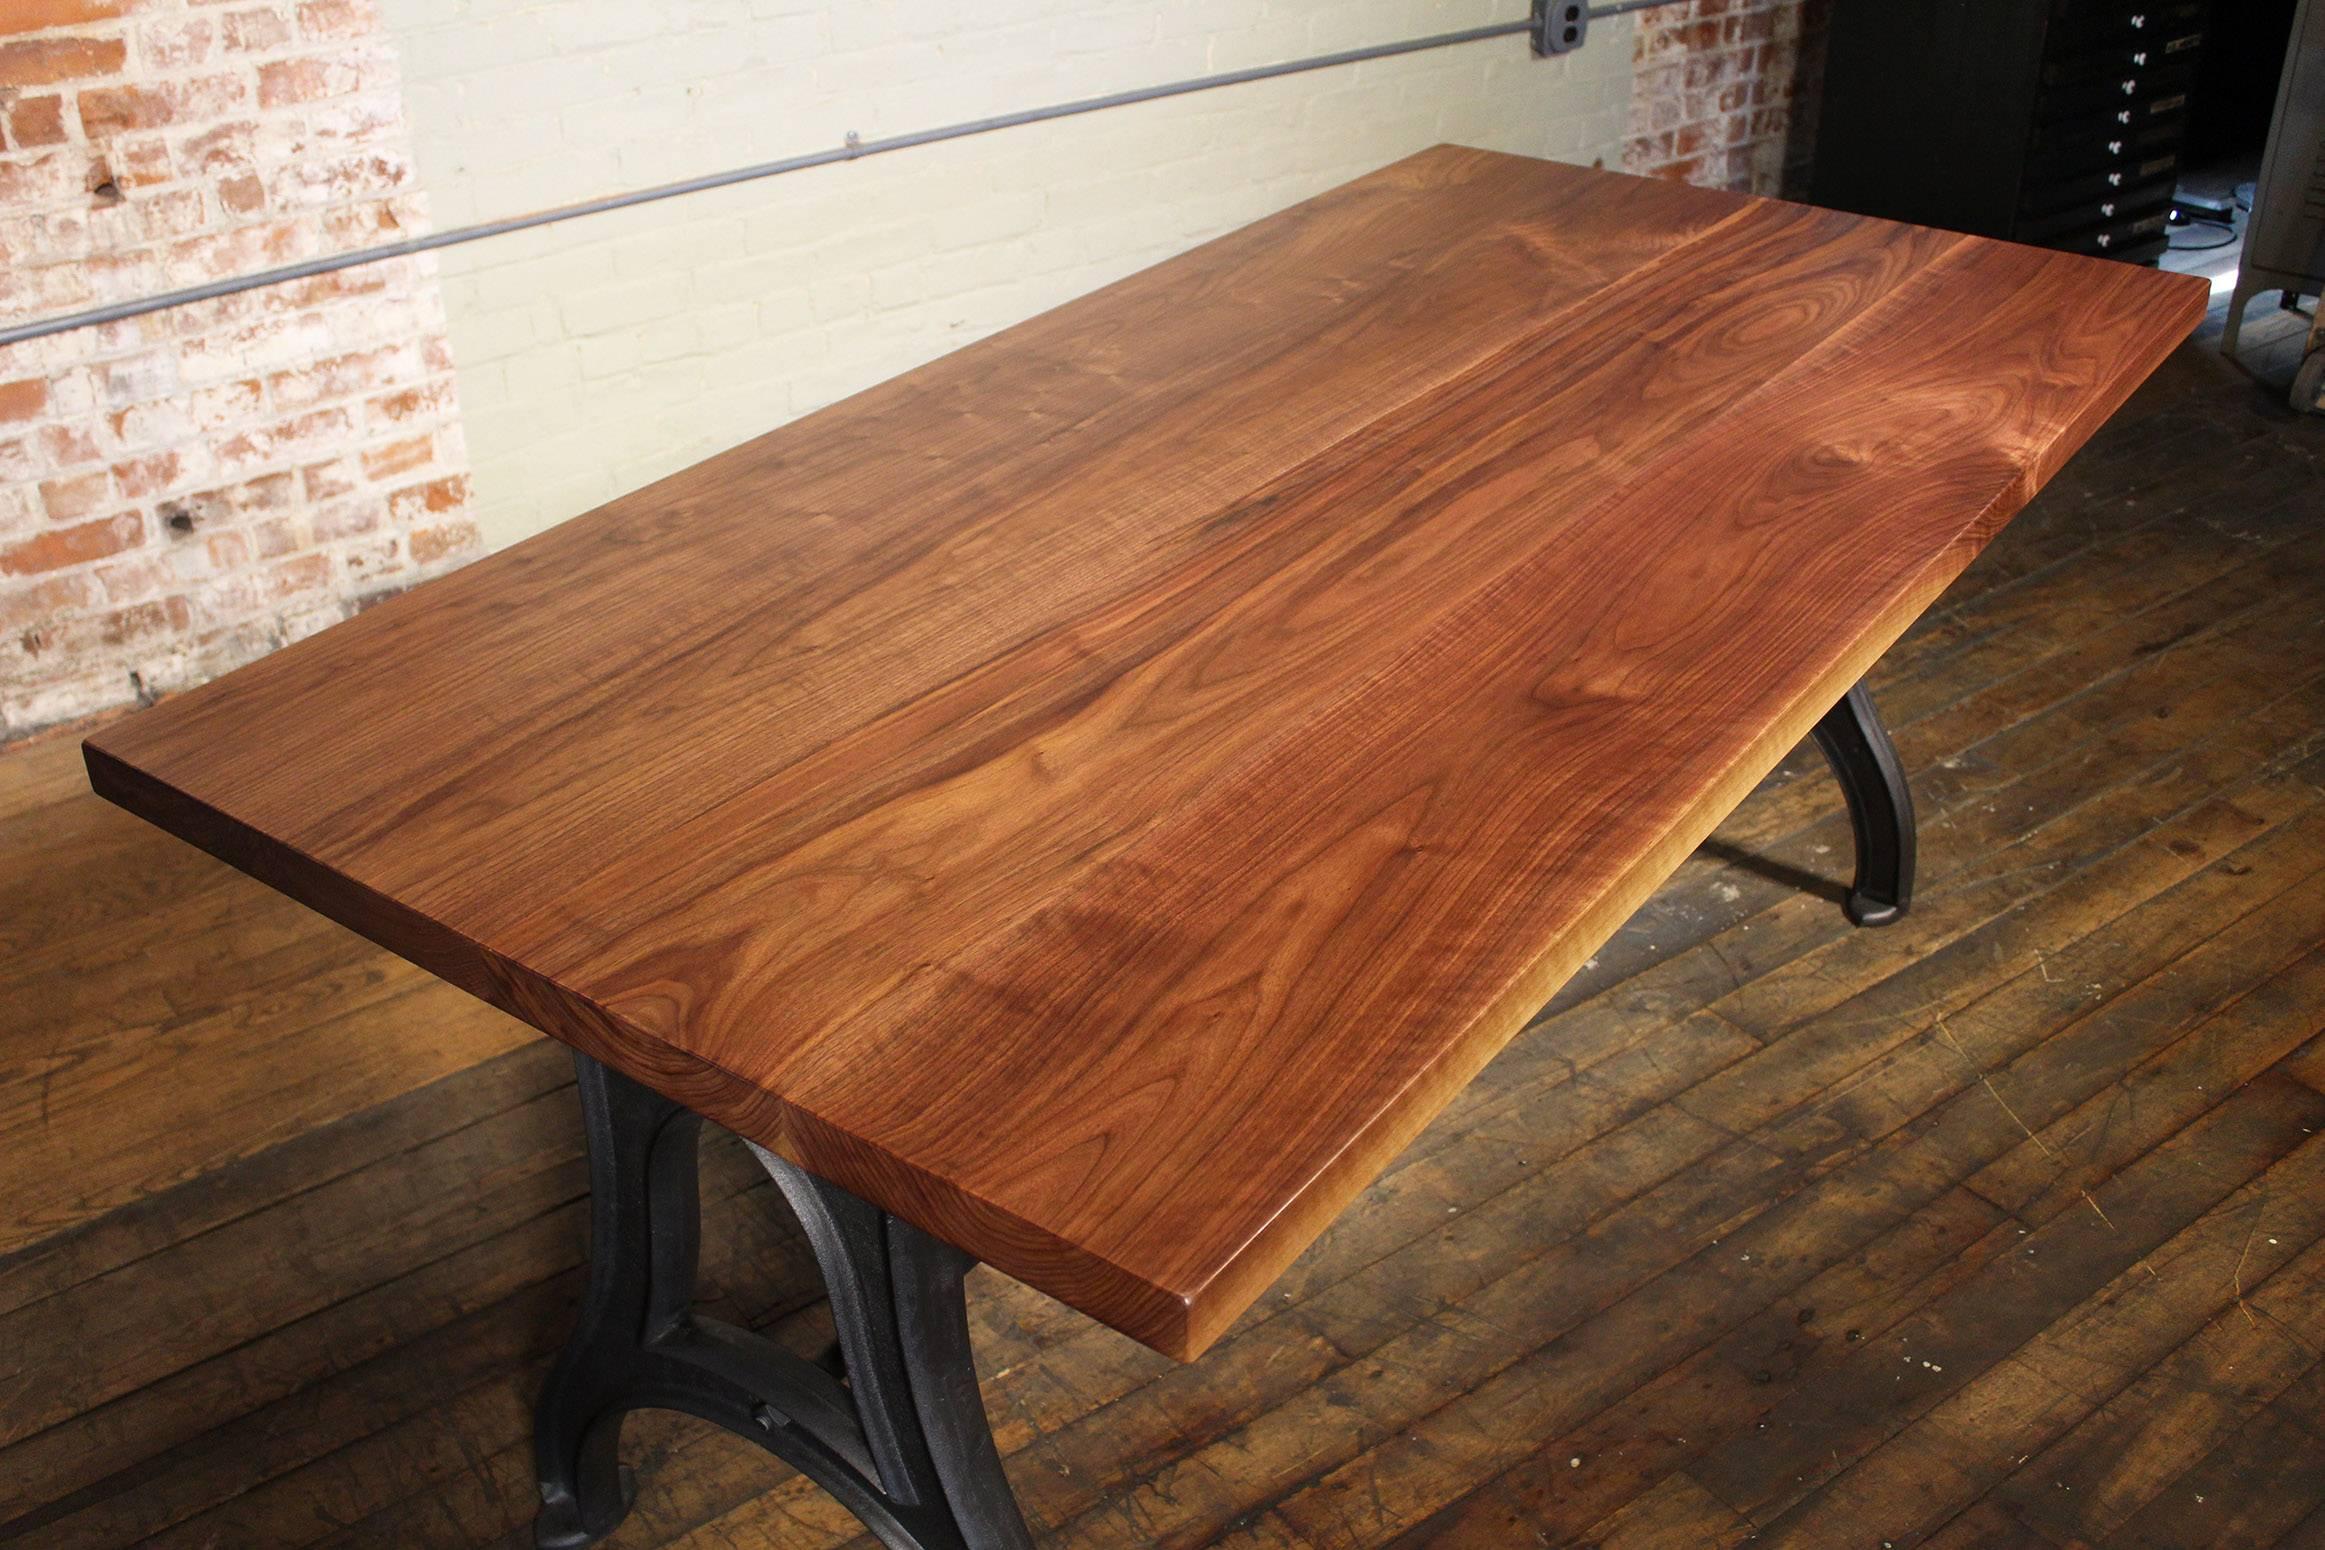 Bespoke Walnut Desk with Cast Iron Legs Industrial Modern Work Custom Table In Good Condition For Sale In Oakville, CT